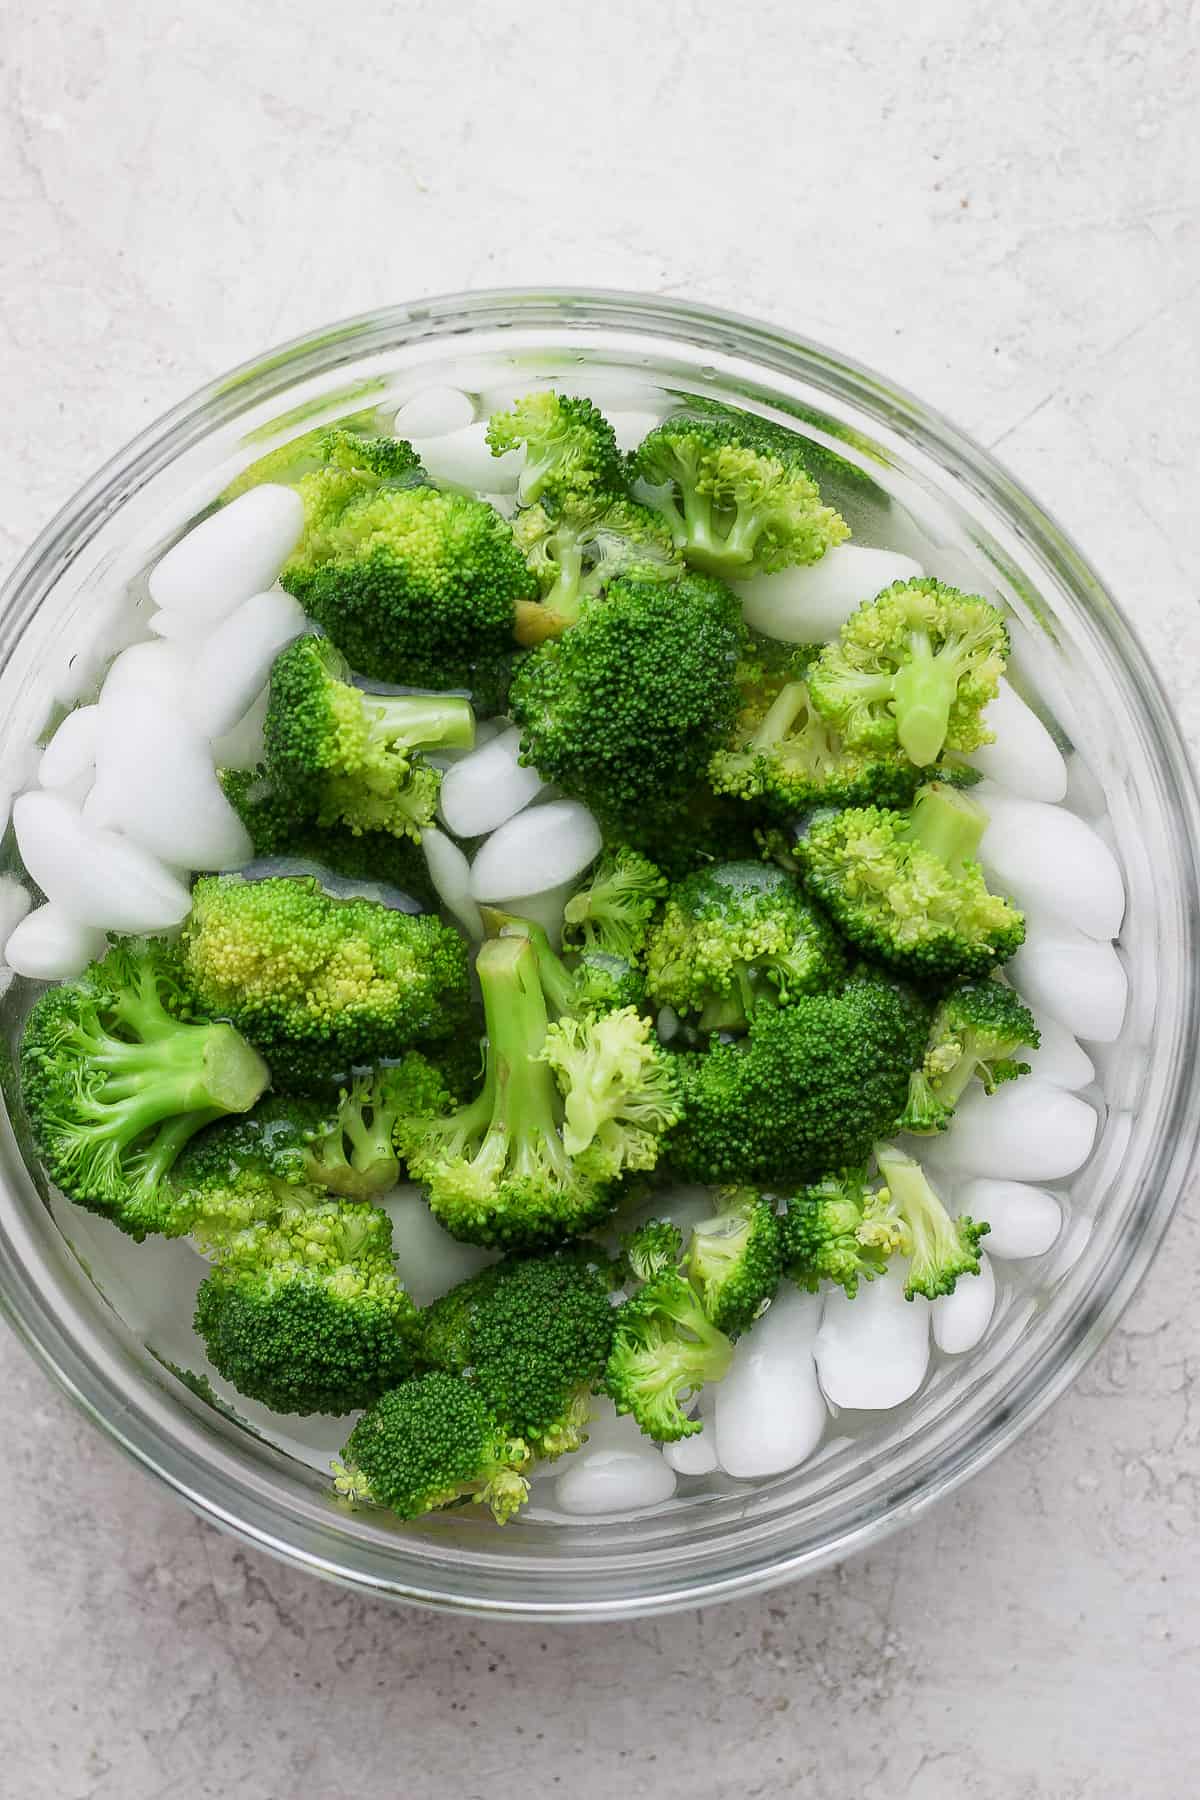 Broccoli in ice bath for blanching